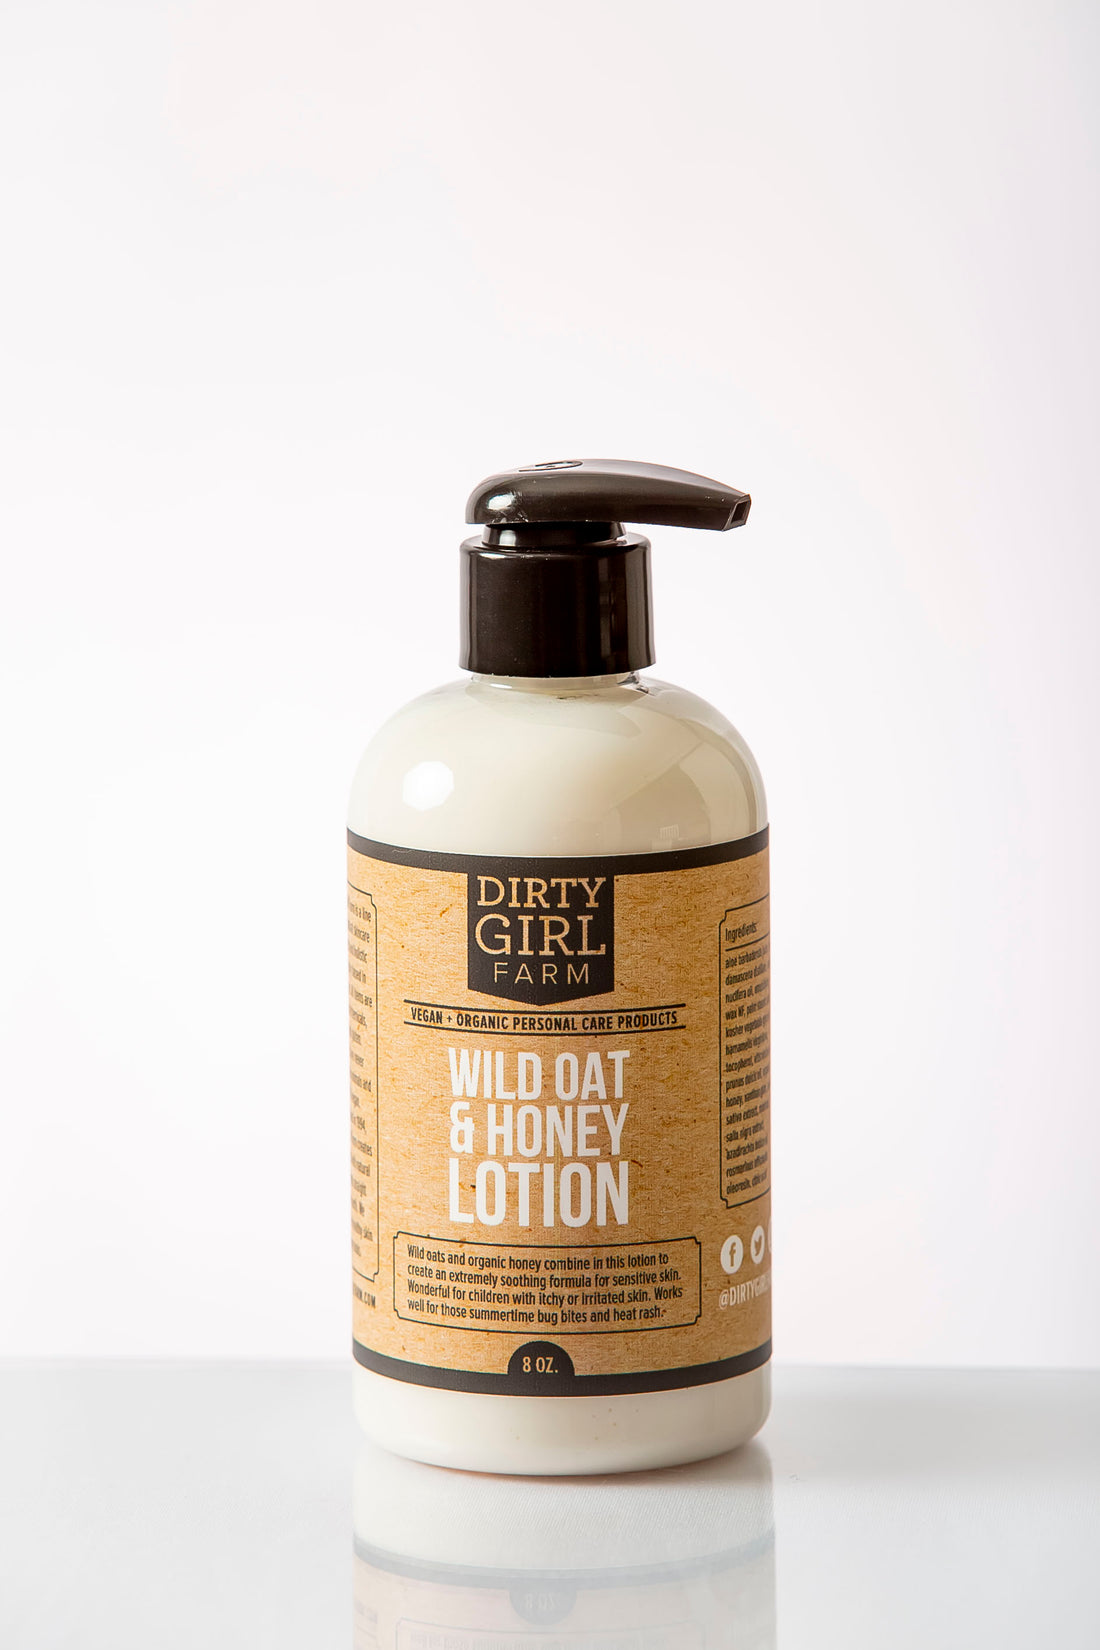 Dirty Girl Farm Wild Oat and Honey Lotion